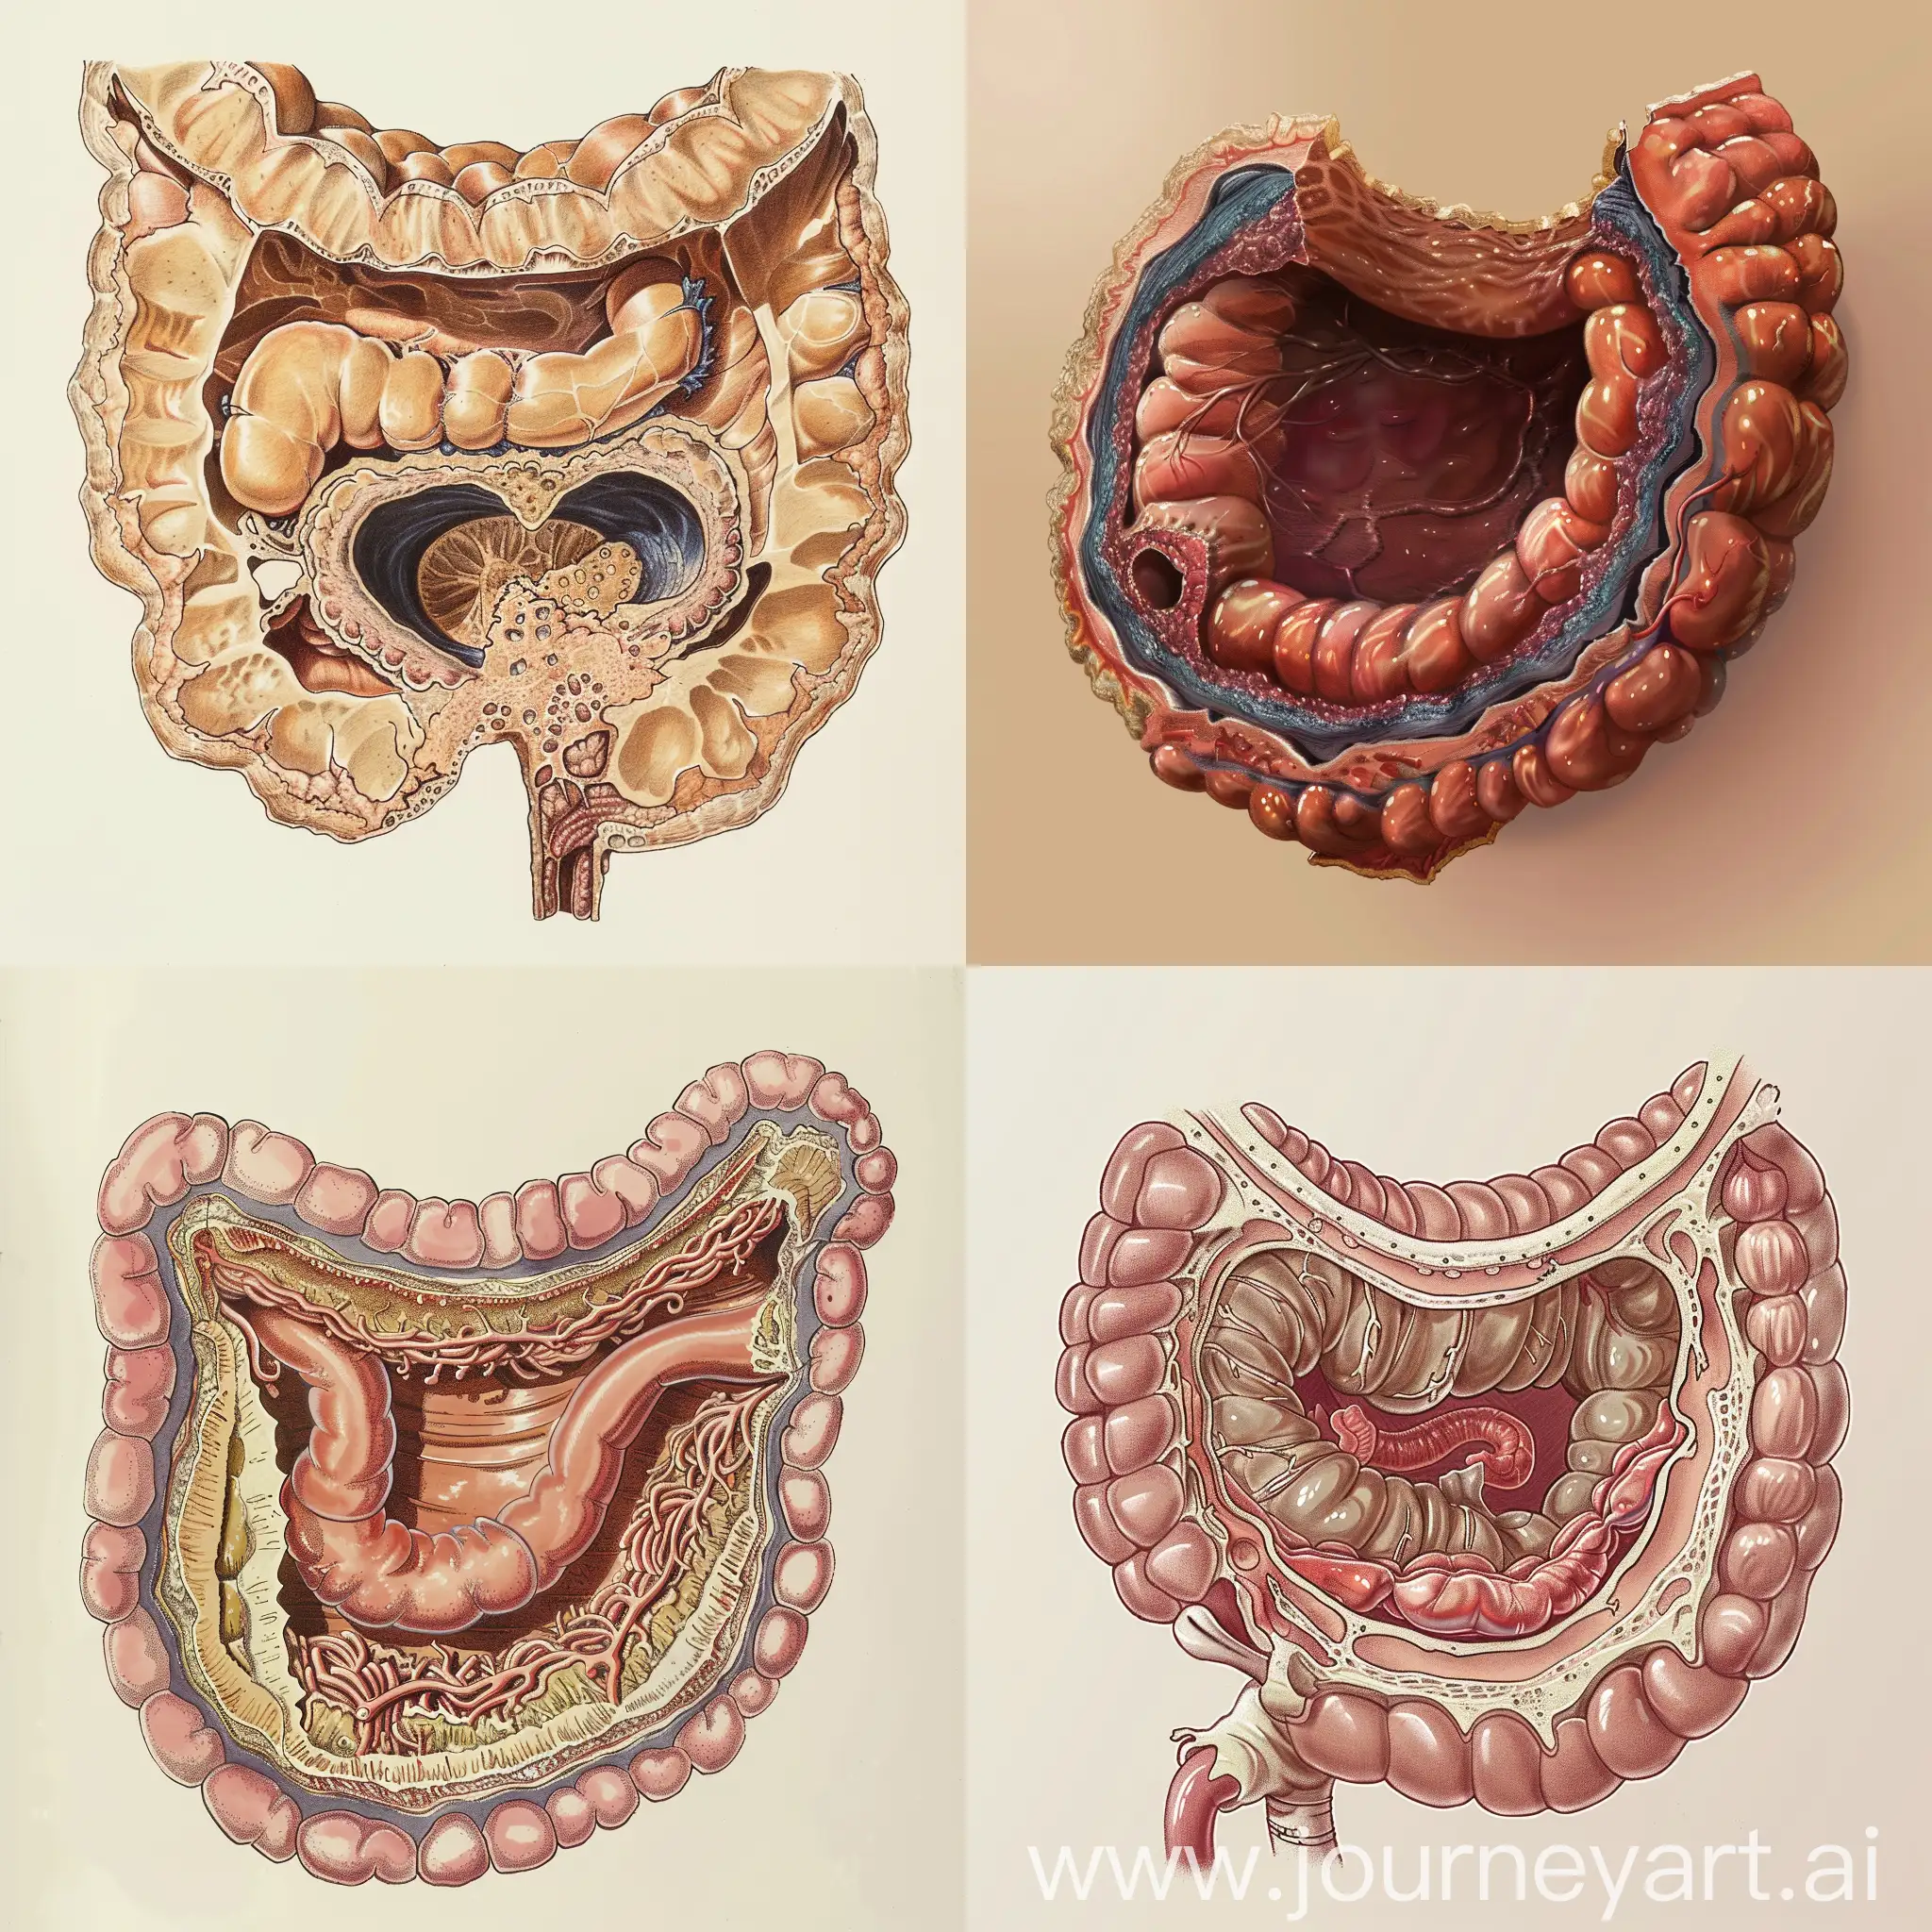 Represent colonic diverticulum as in an anatomical textbook, Netter's style. The bowel has to be represented in an anatomical cross section, with detailed mucosal and submucosal layers that form the walls of the diverticulum.